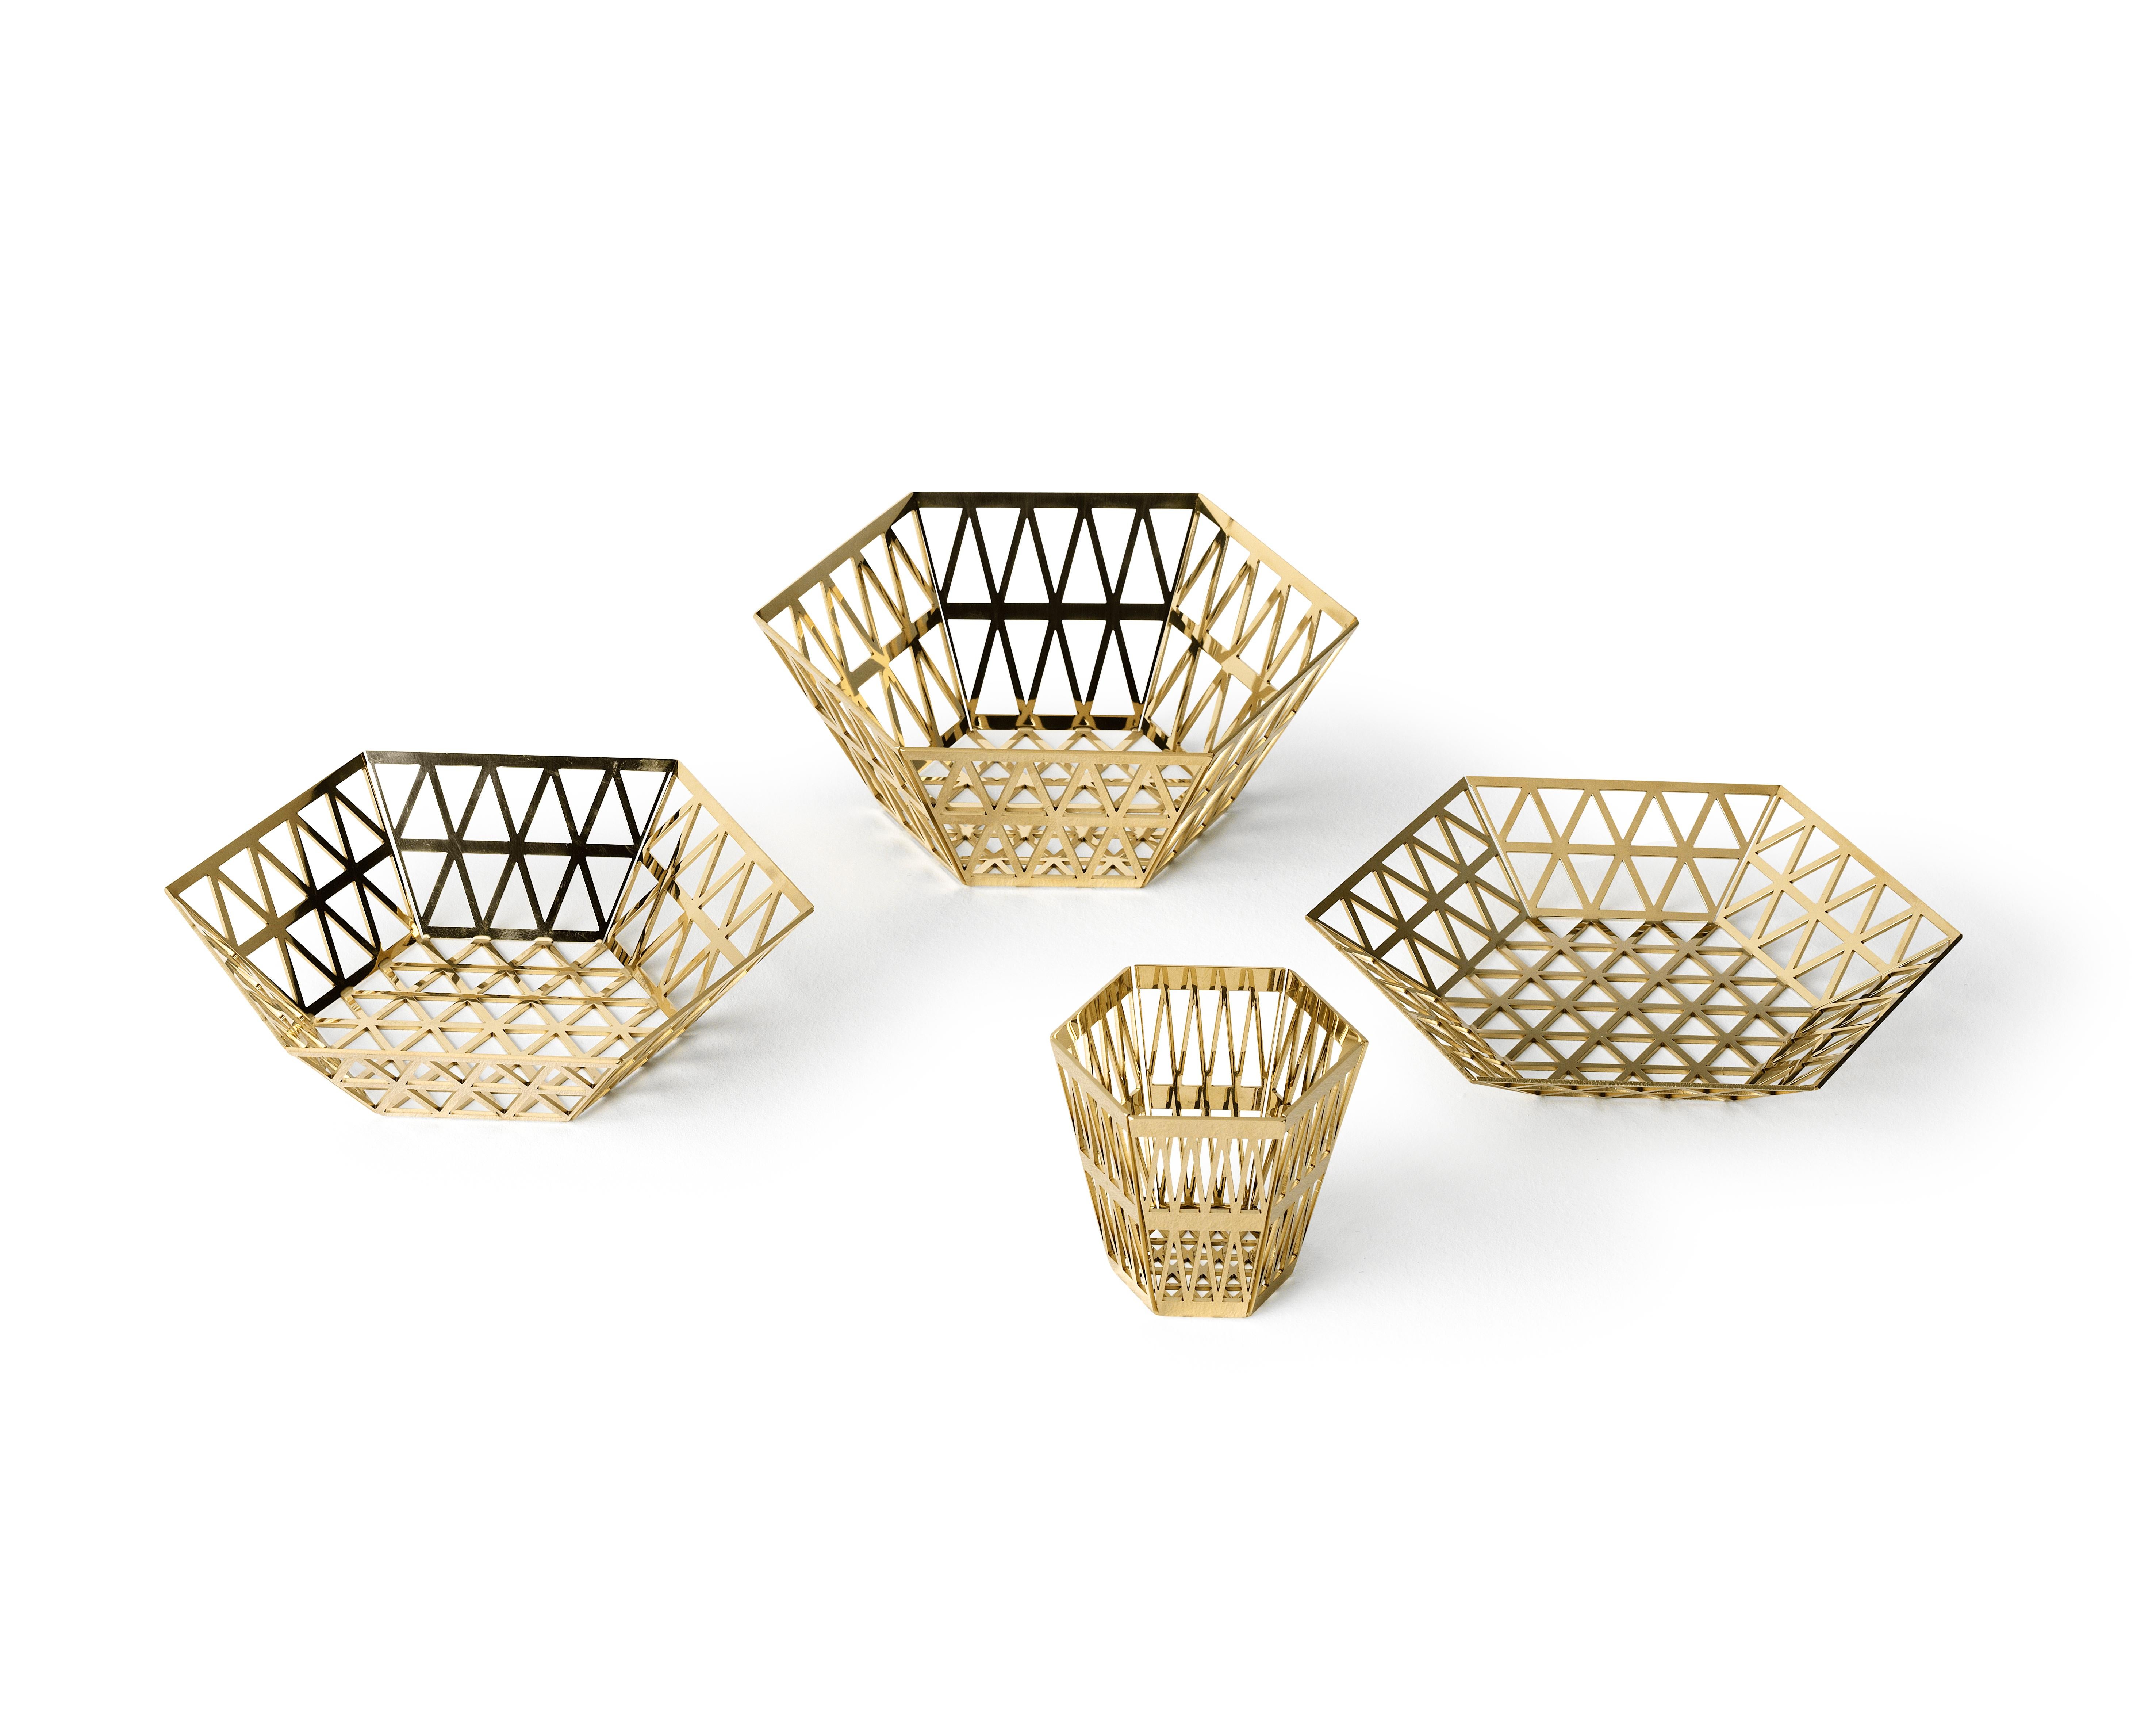 Flat tray in openwork steel
When you look at the top view of the Tip-Top series, all the triangles have the same size. In 3D these triangles have been stretched, which creates a very surprising hexagonal structure, applied to different